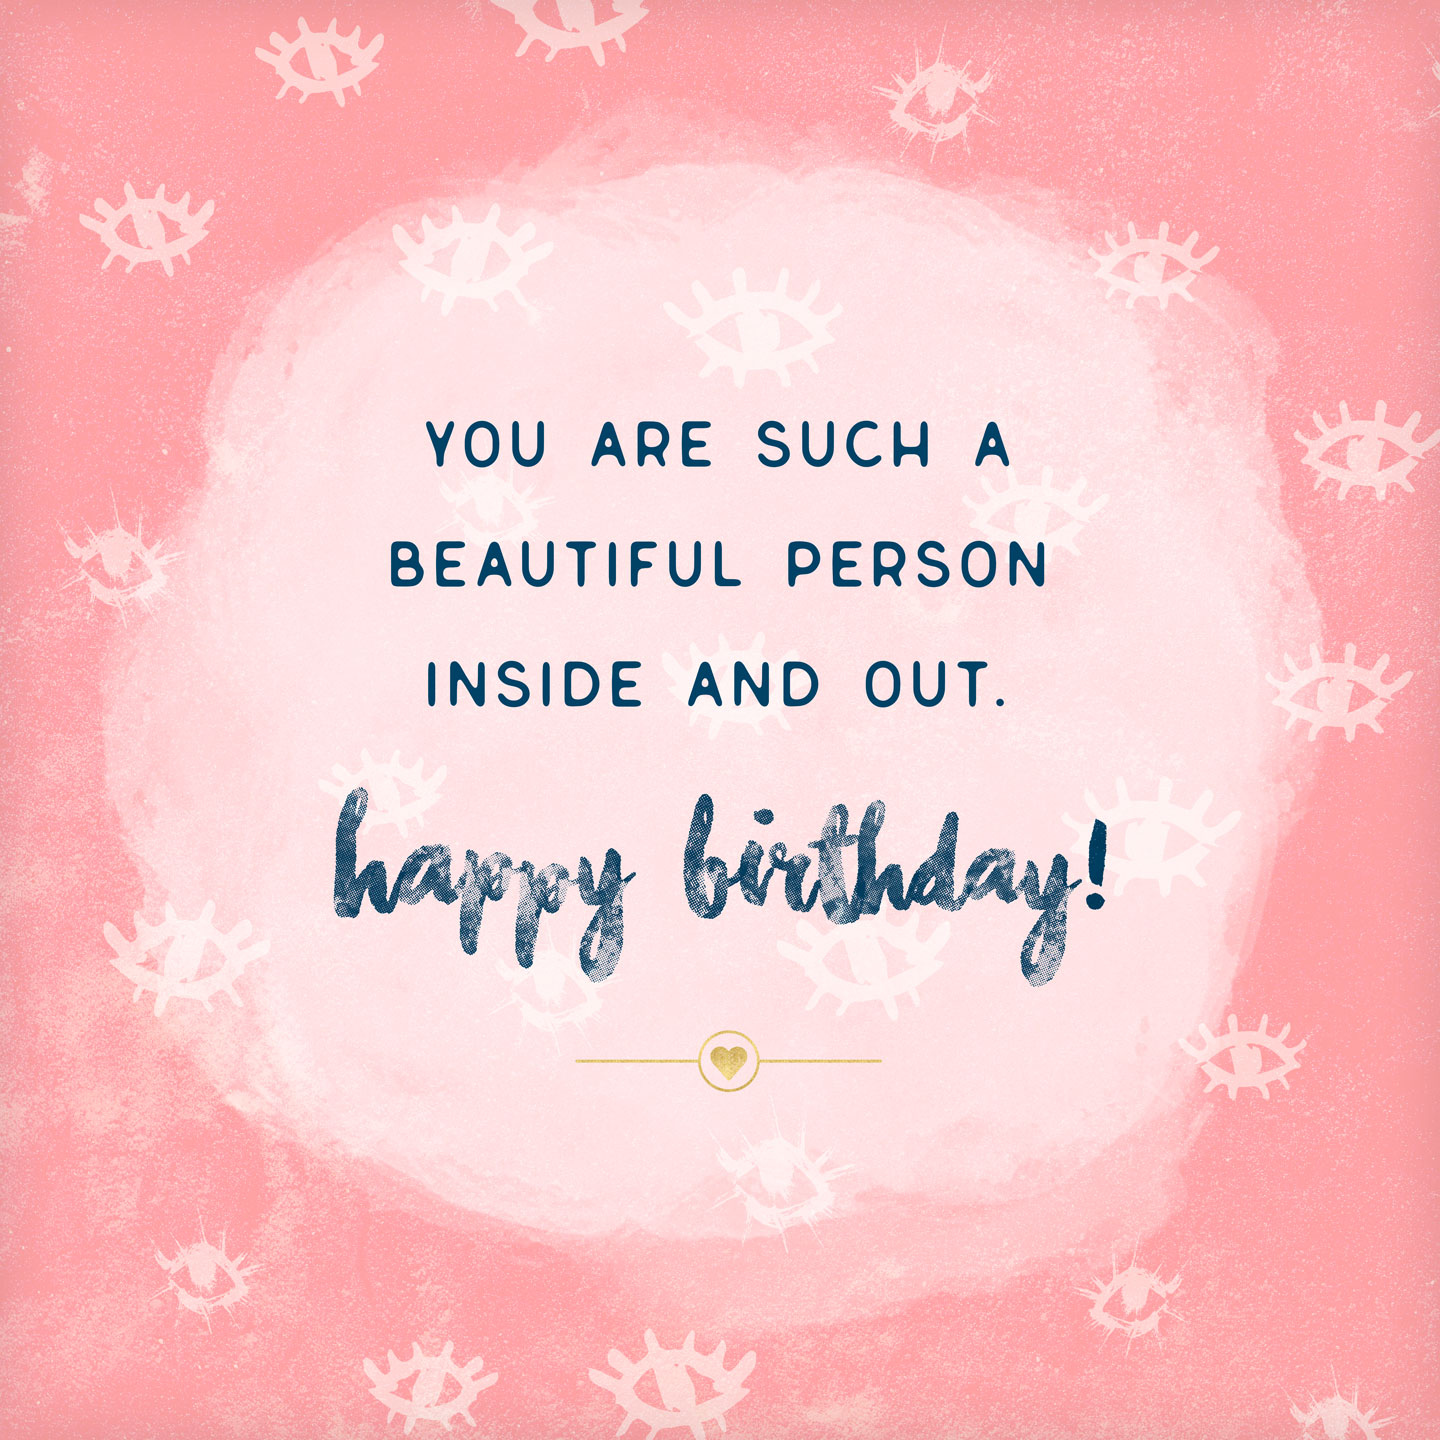 what-to-write-in-a-birthday-card-48-birthday-messages-and-wishes-ftd